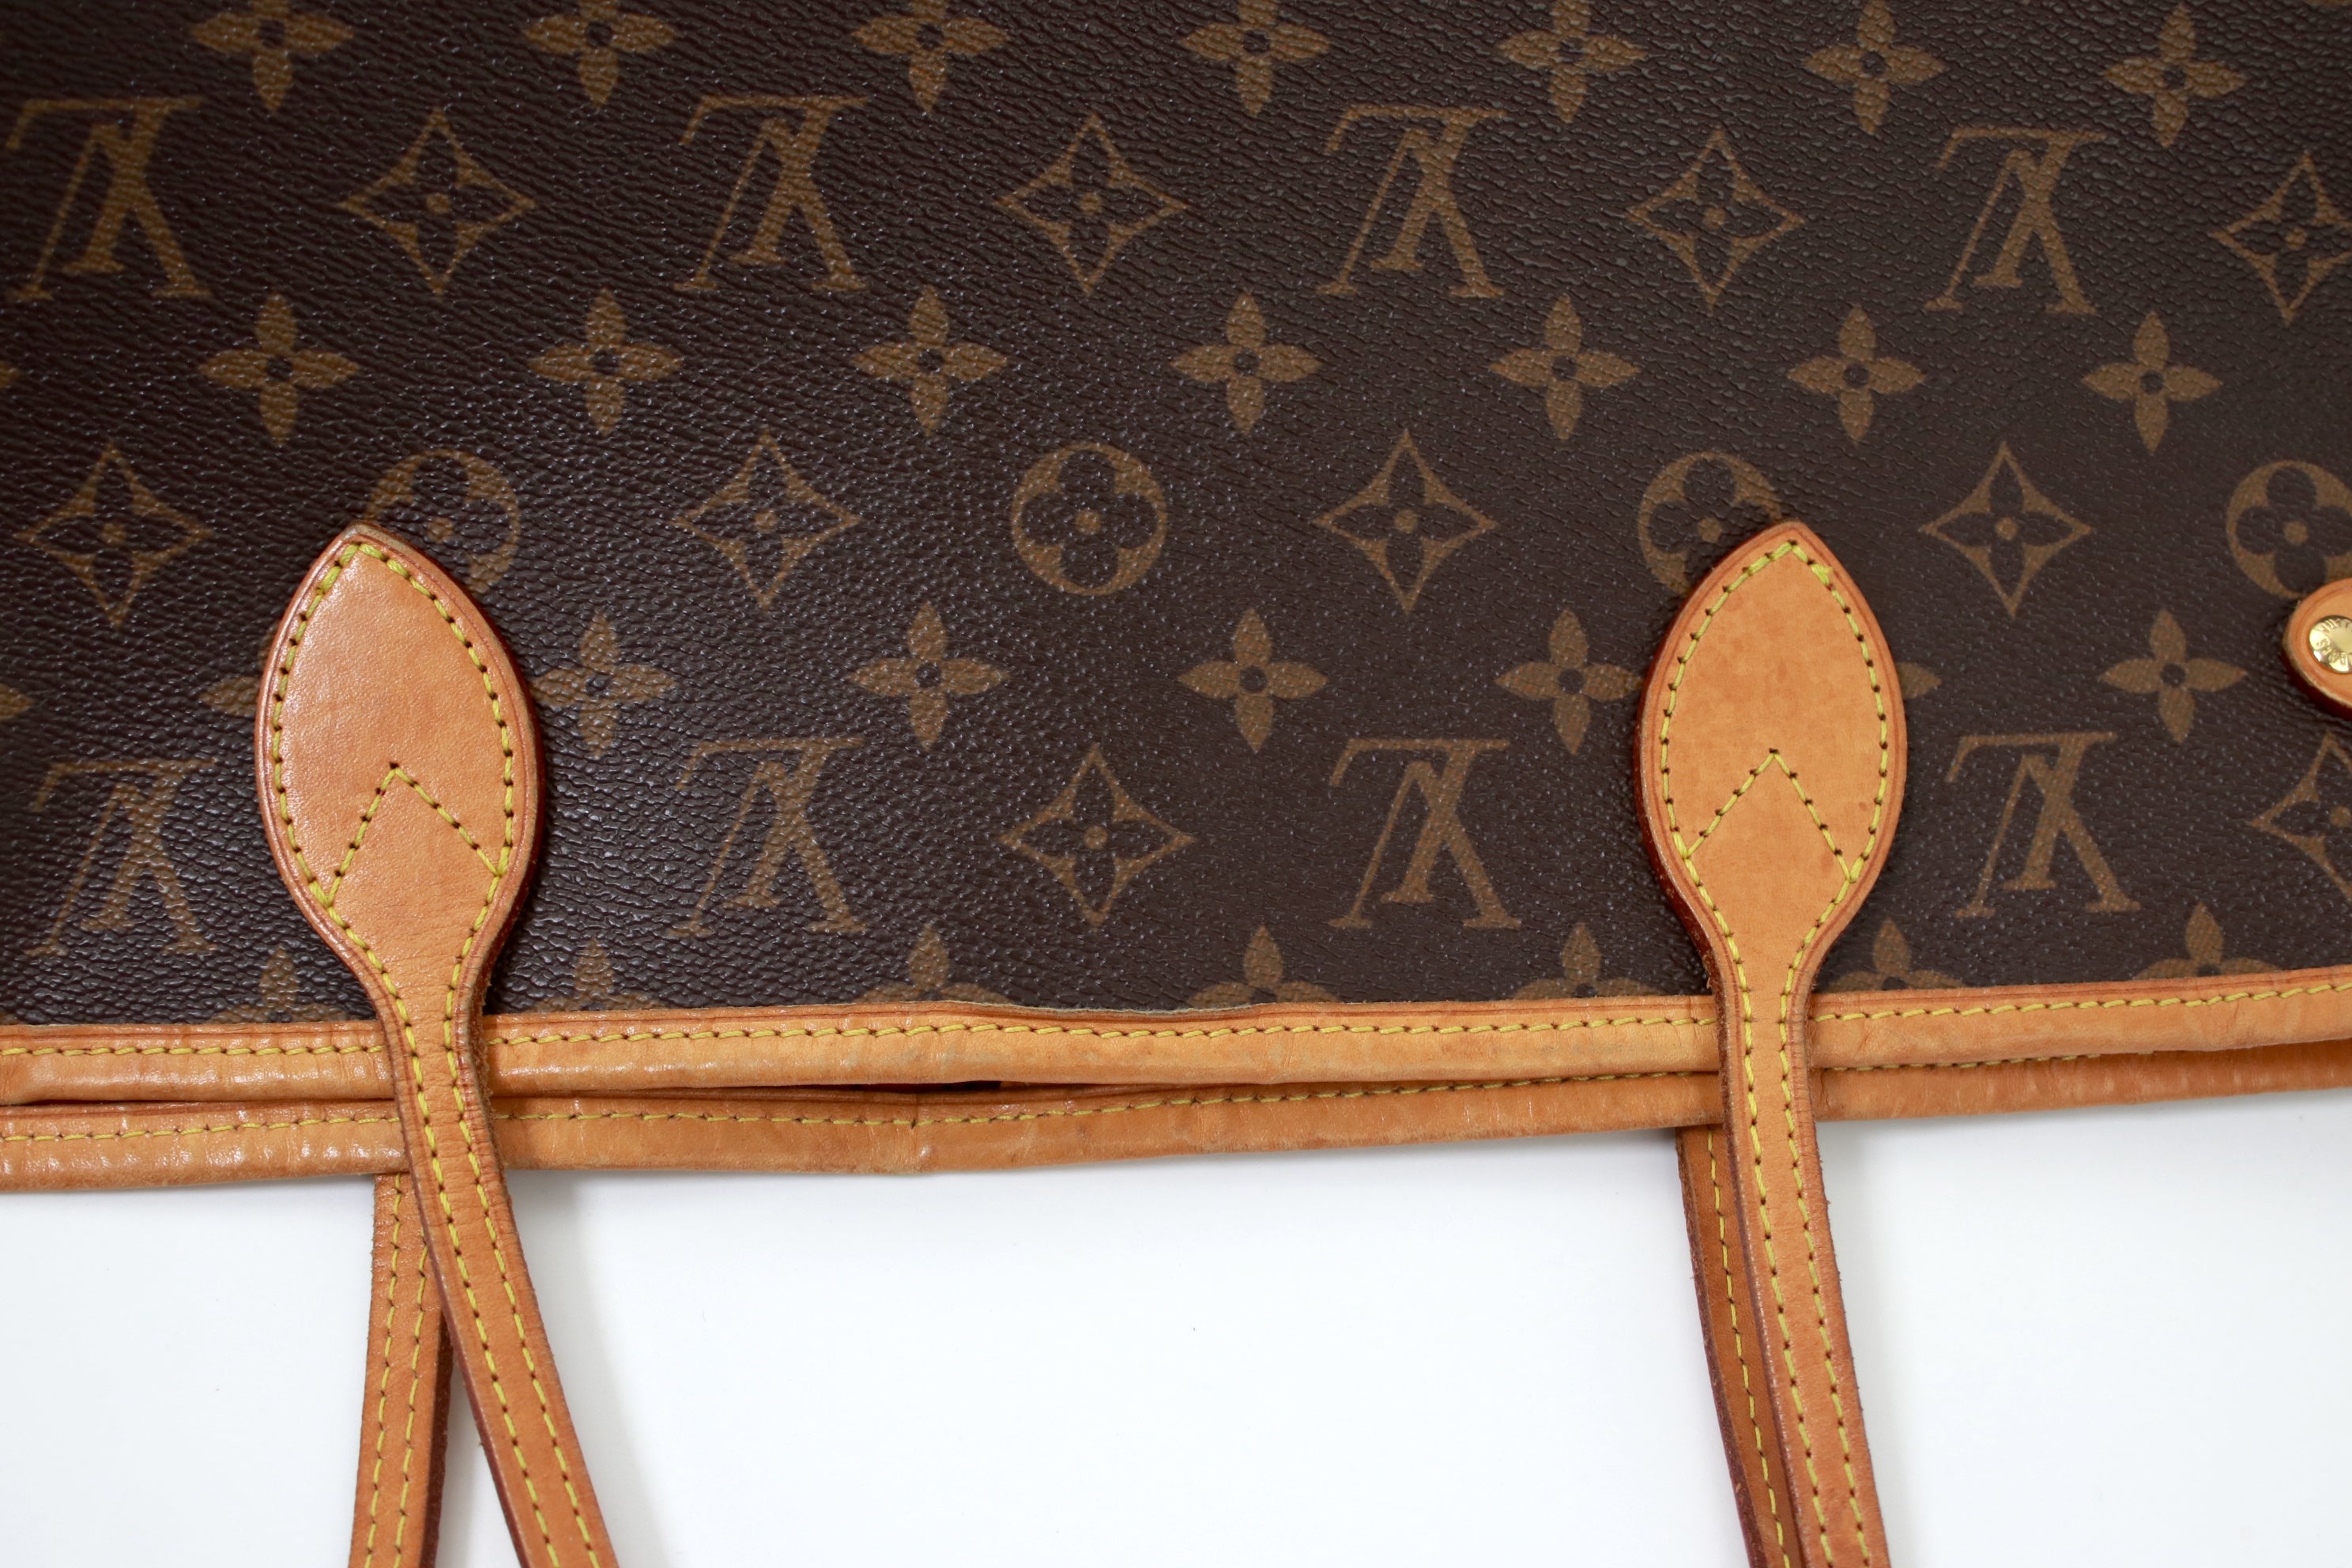 Buy Free Shipping [Used] LOUIS VUITTON Neverfull MM Tote Bag